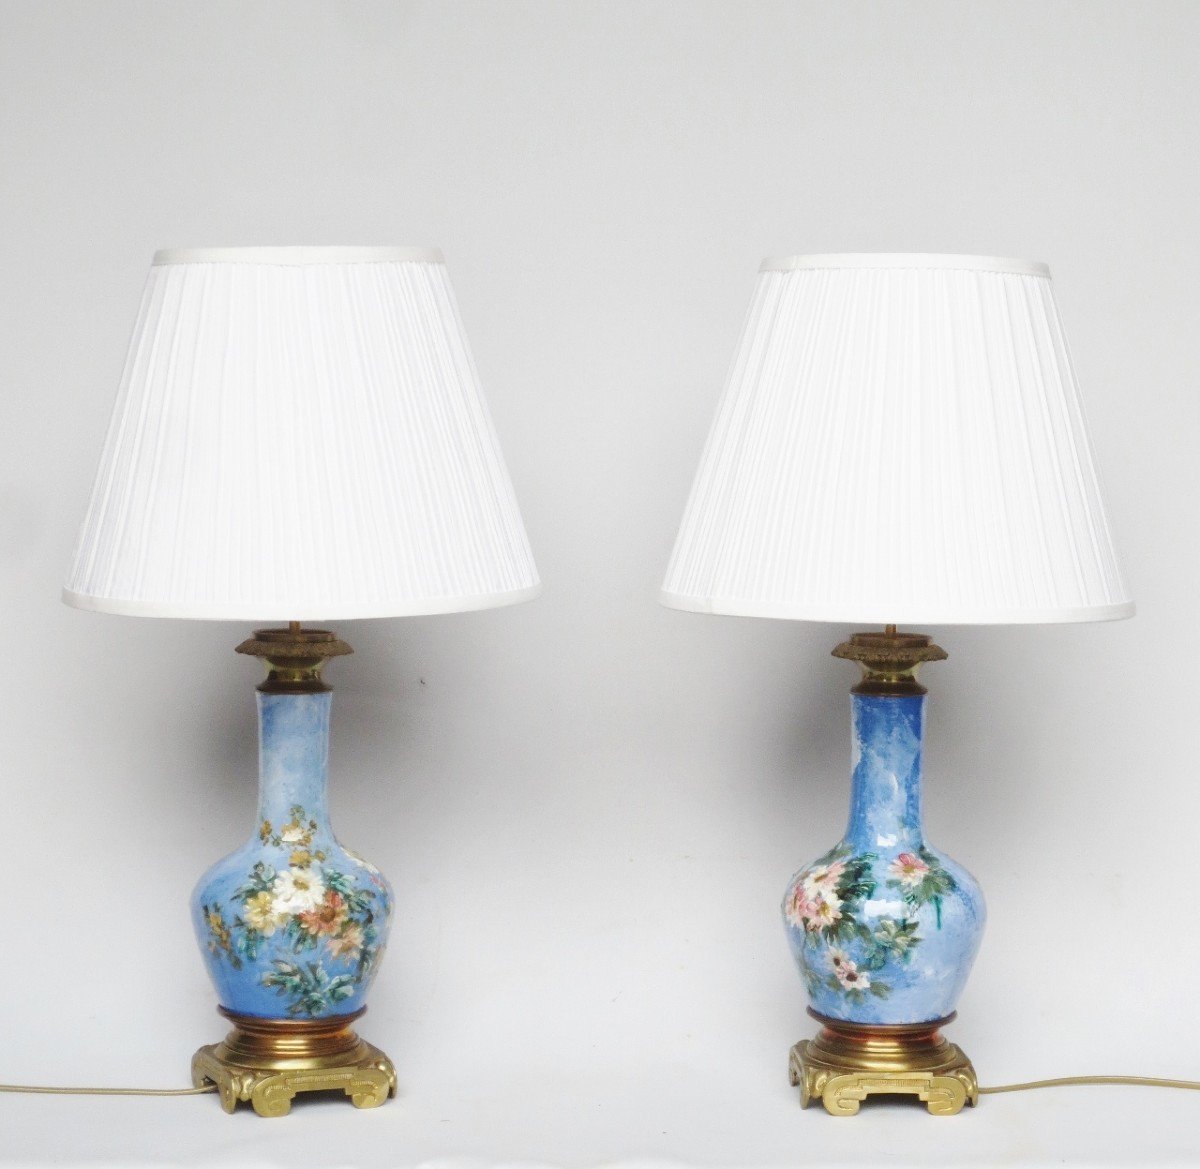 Barbotine Lamps With Impressionist Decor.